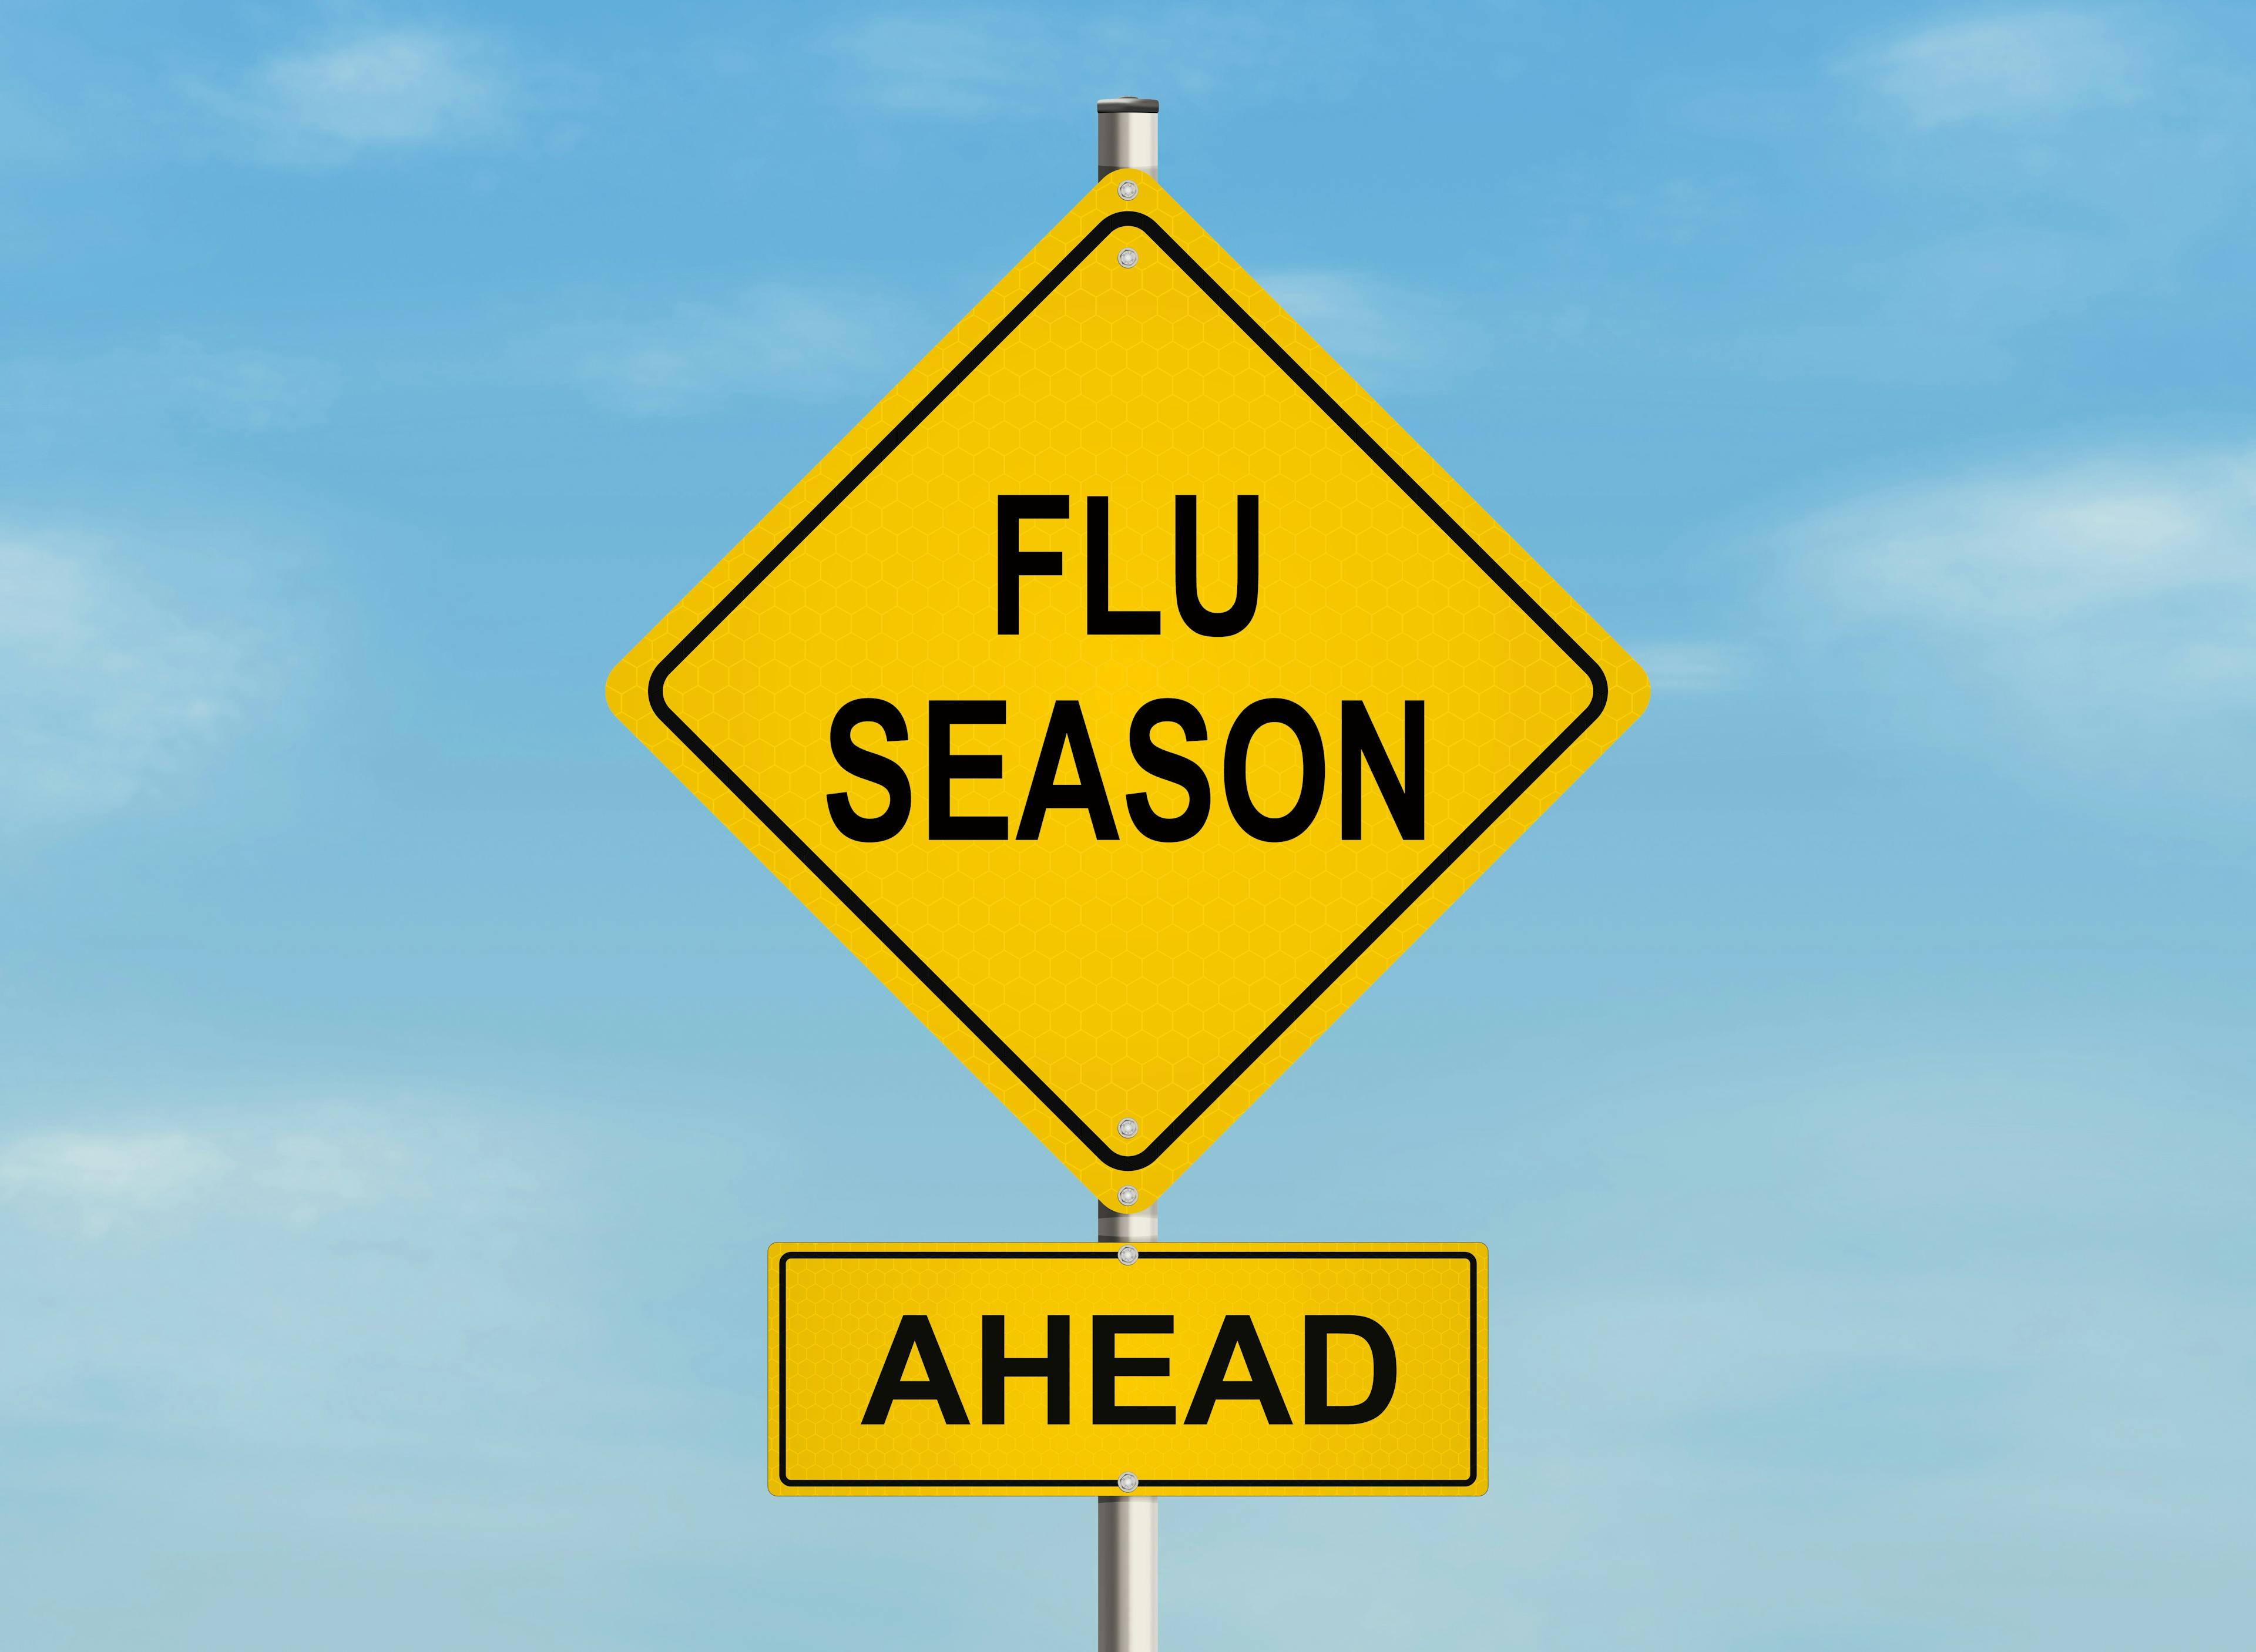 FDA approves Xofluza for high-risk flu patients